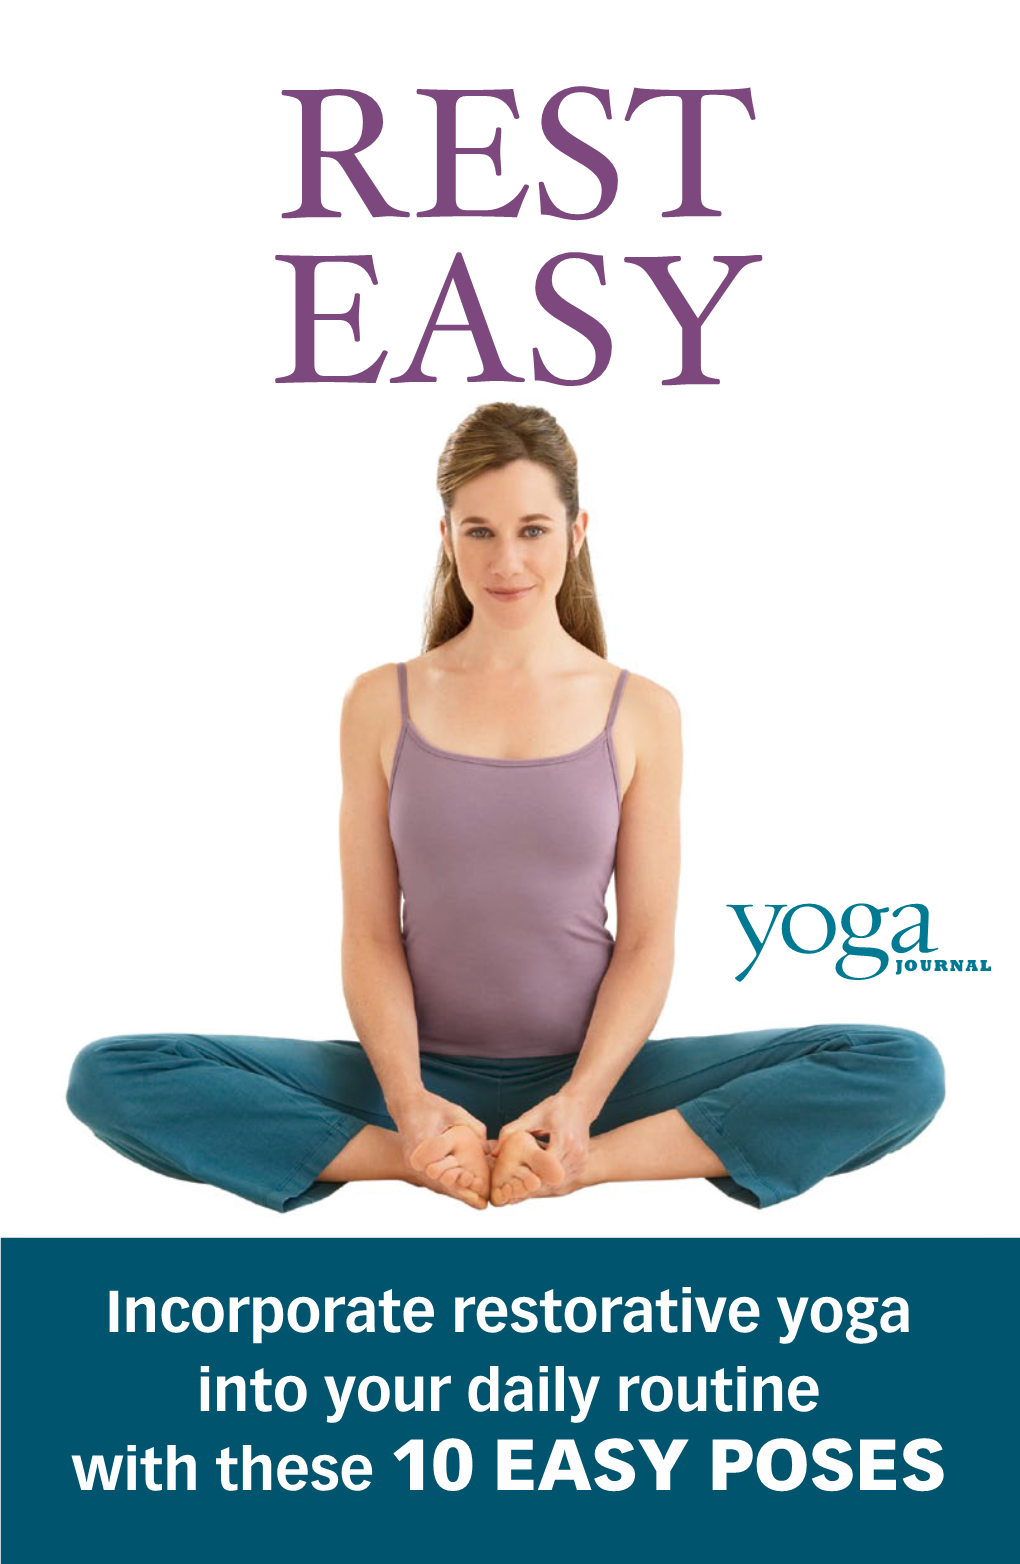 With These 10 Easy Poses Rest Easy HOME PRACTICE When Life Is at Its Most Demanding, It’S Hard to Imagine Finding a Little Extra Room for Relaxation